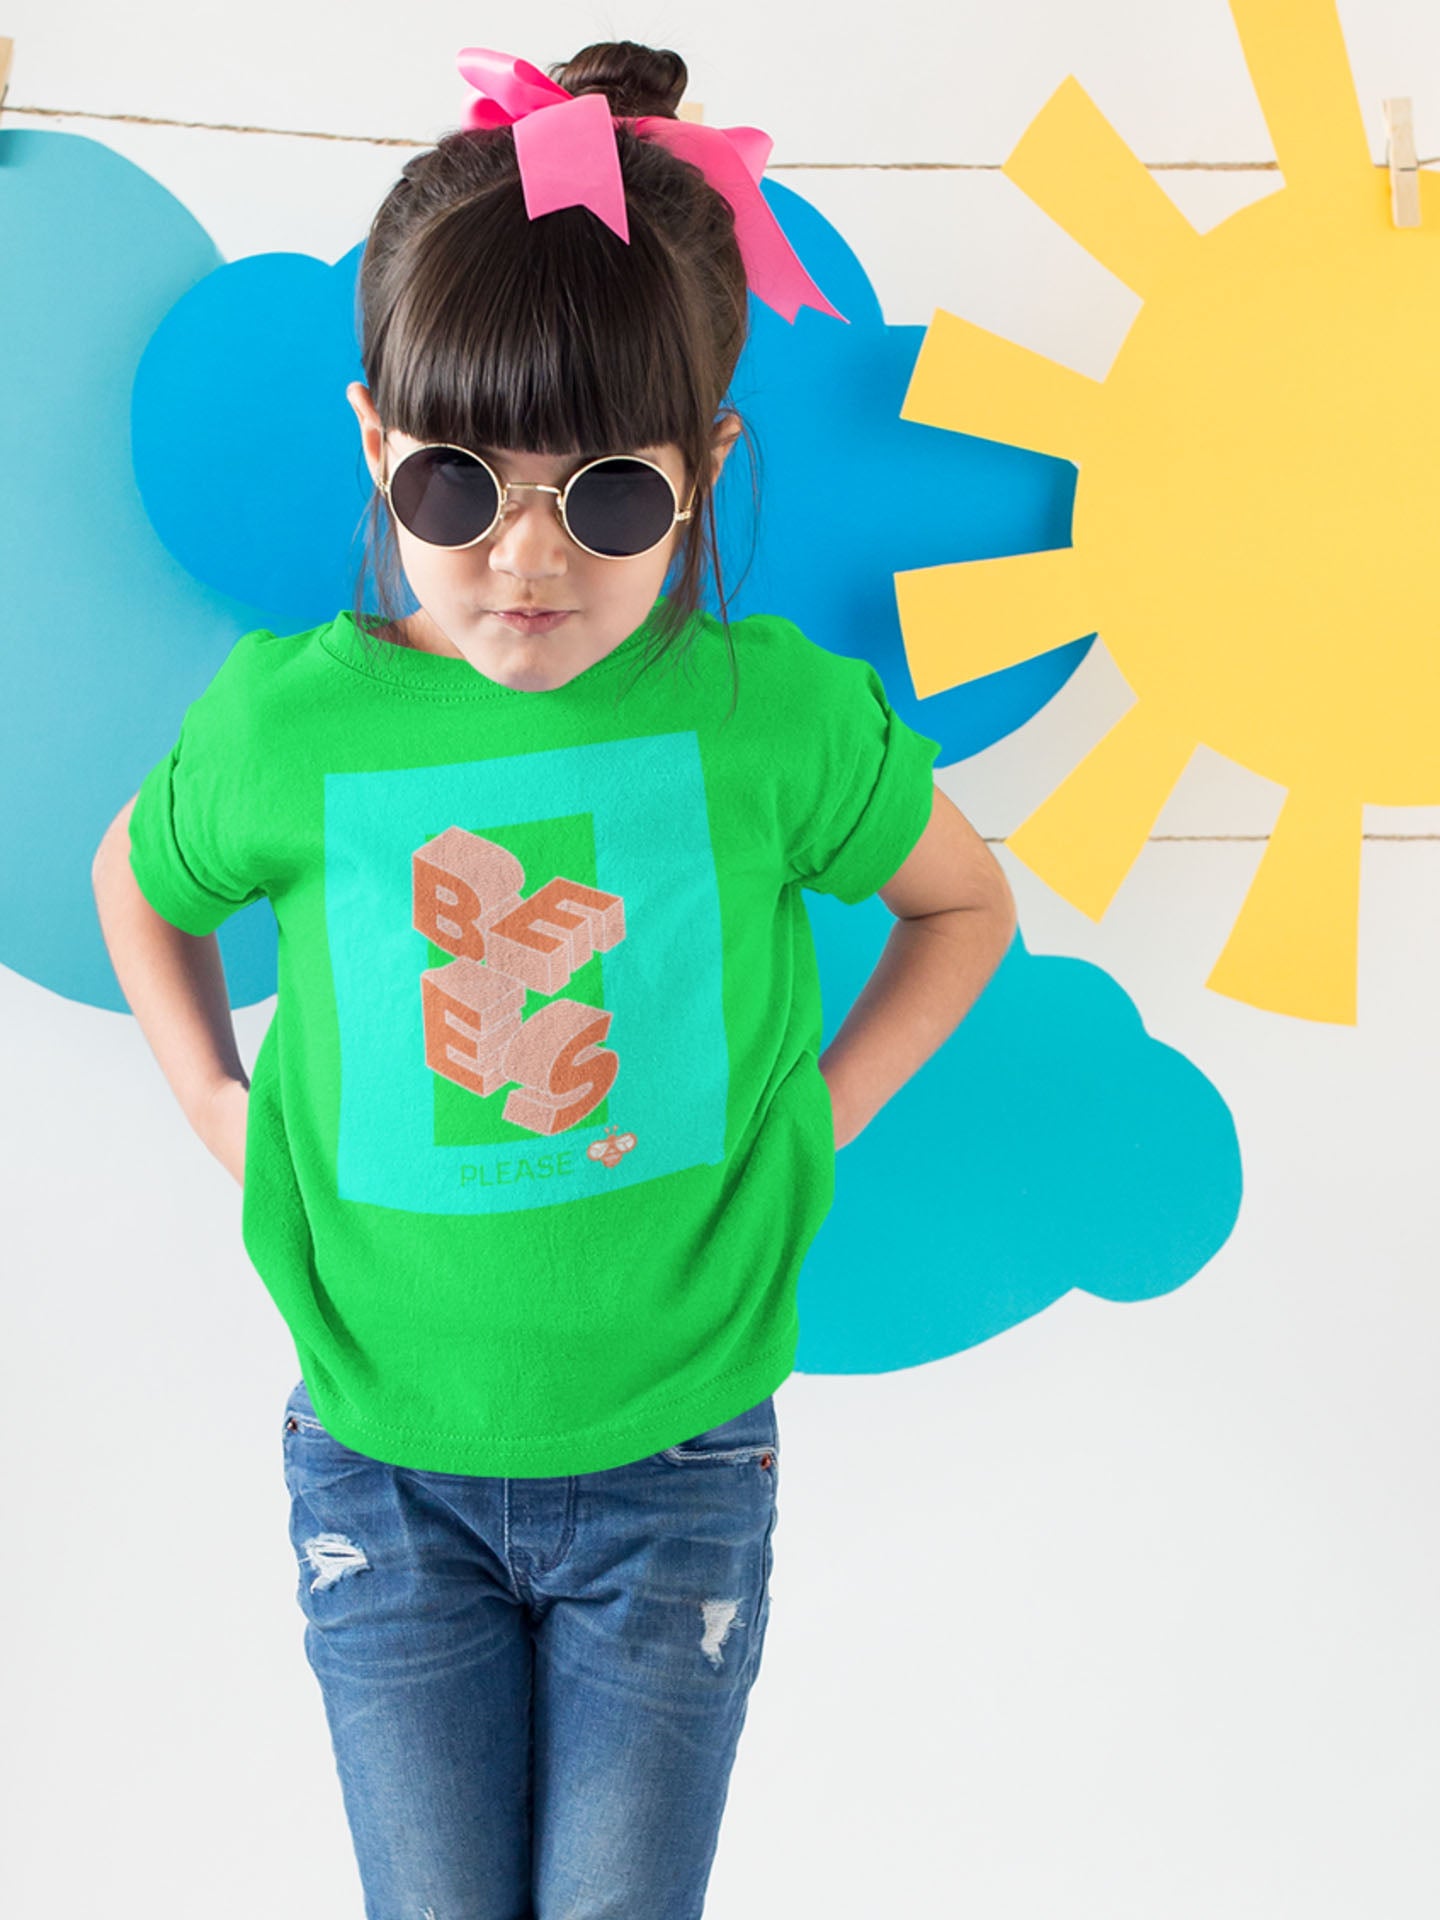 little girl wearing sunglasses and green tshirt with bees please graphic design